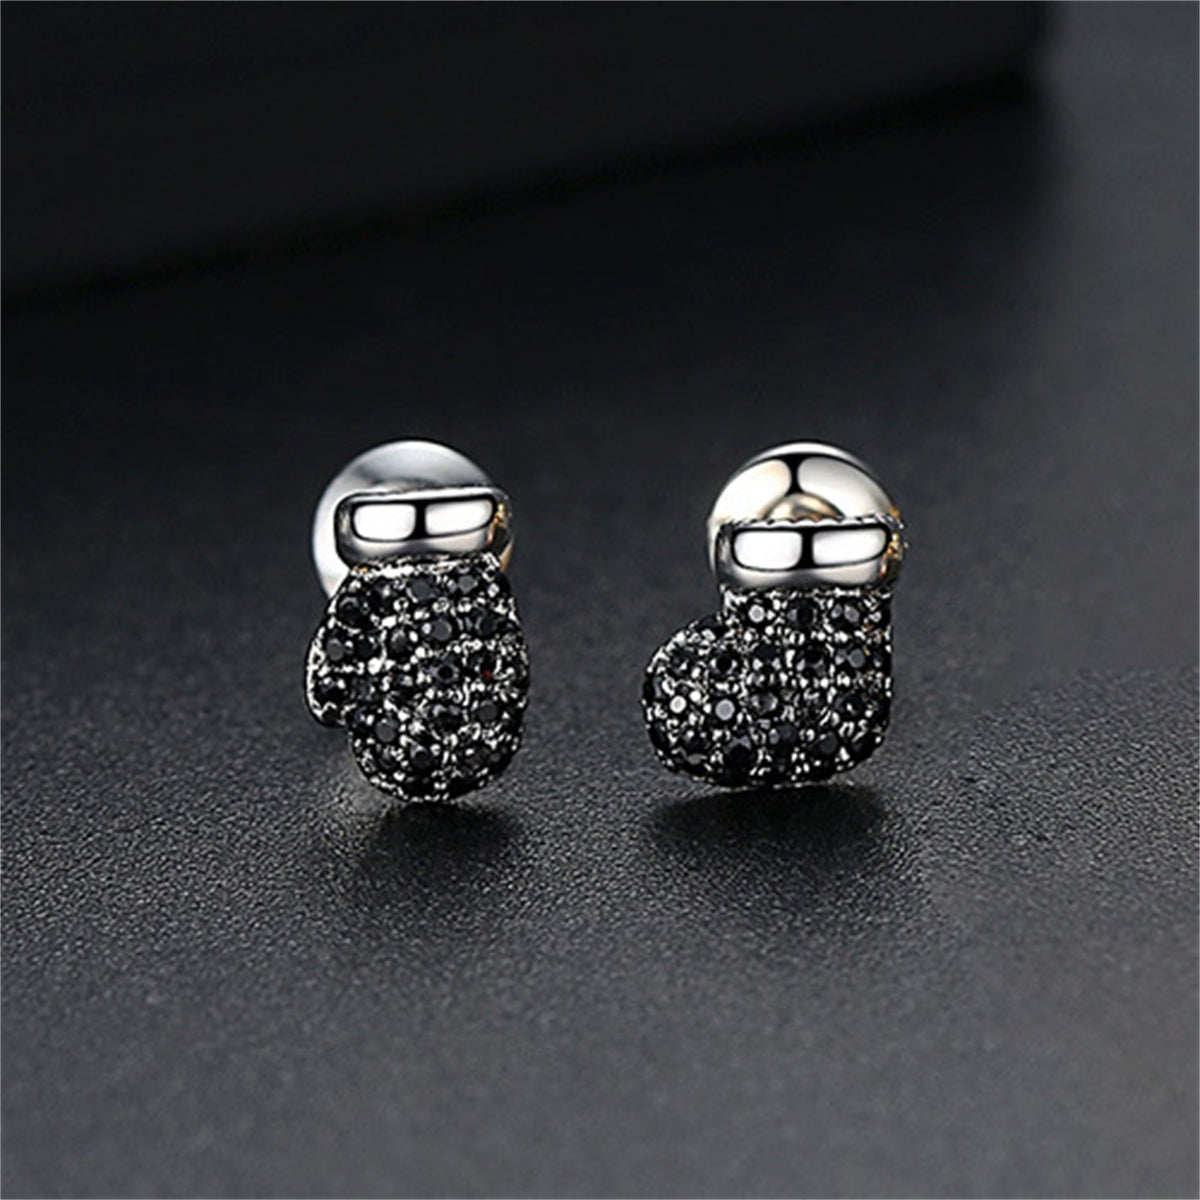 Black Cubic Zirconia & Silver-Plated Mitten & Stocking Stud Earrings